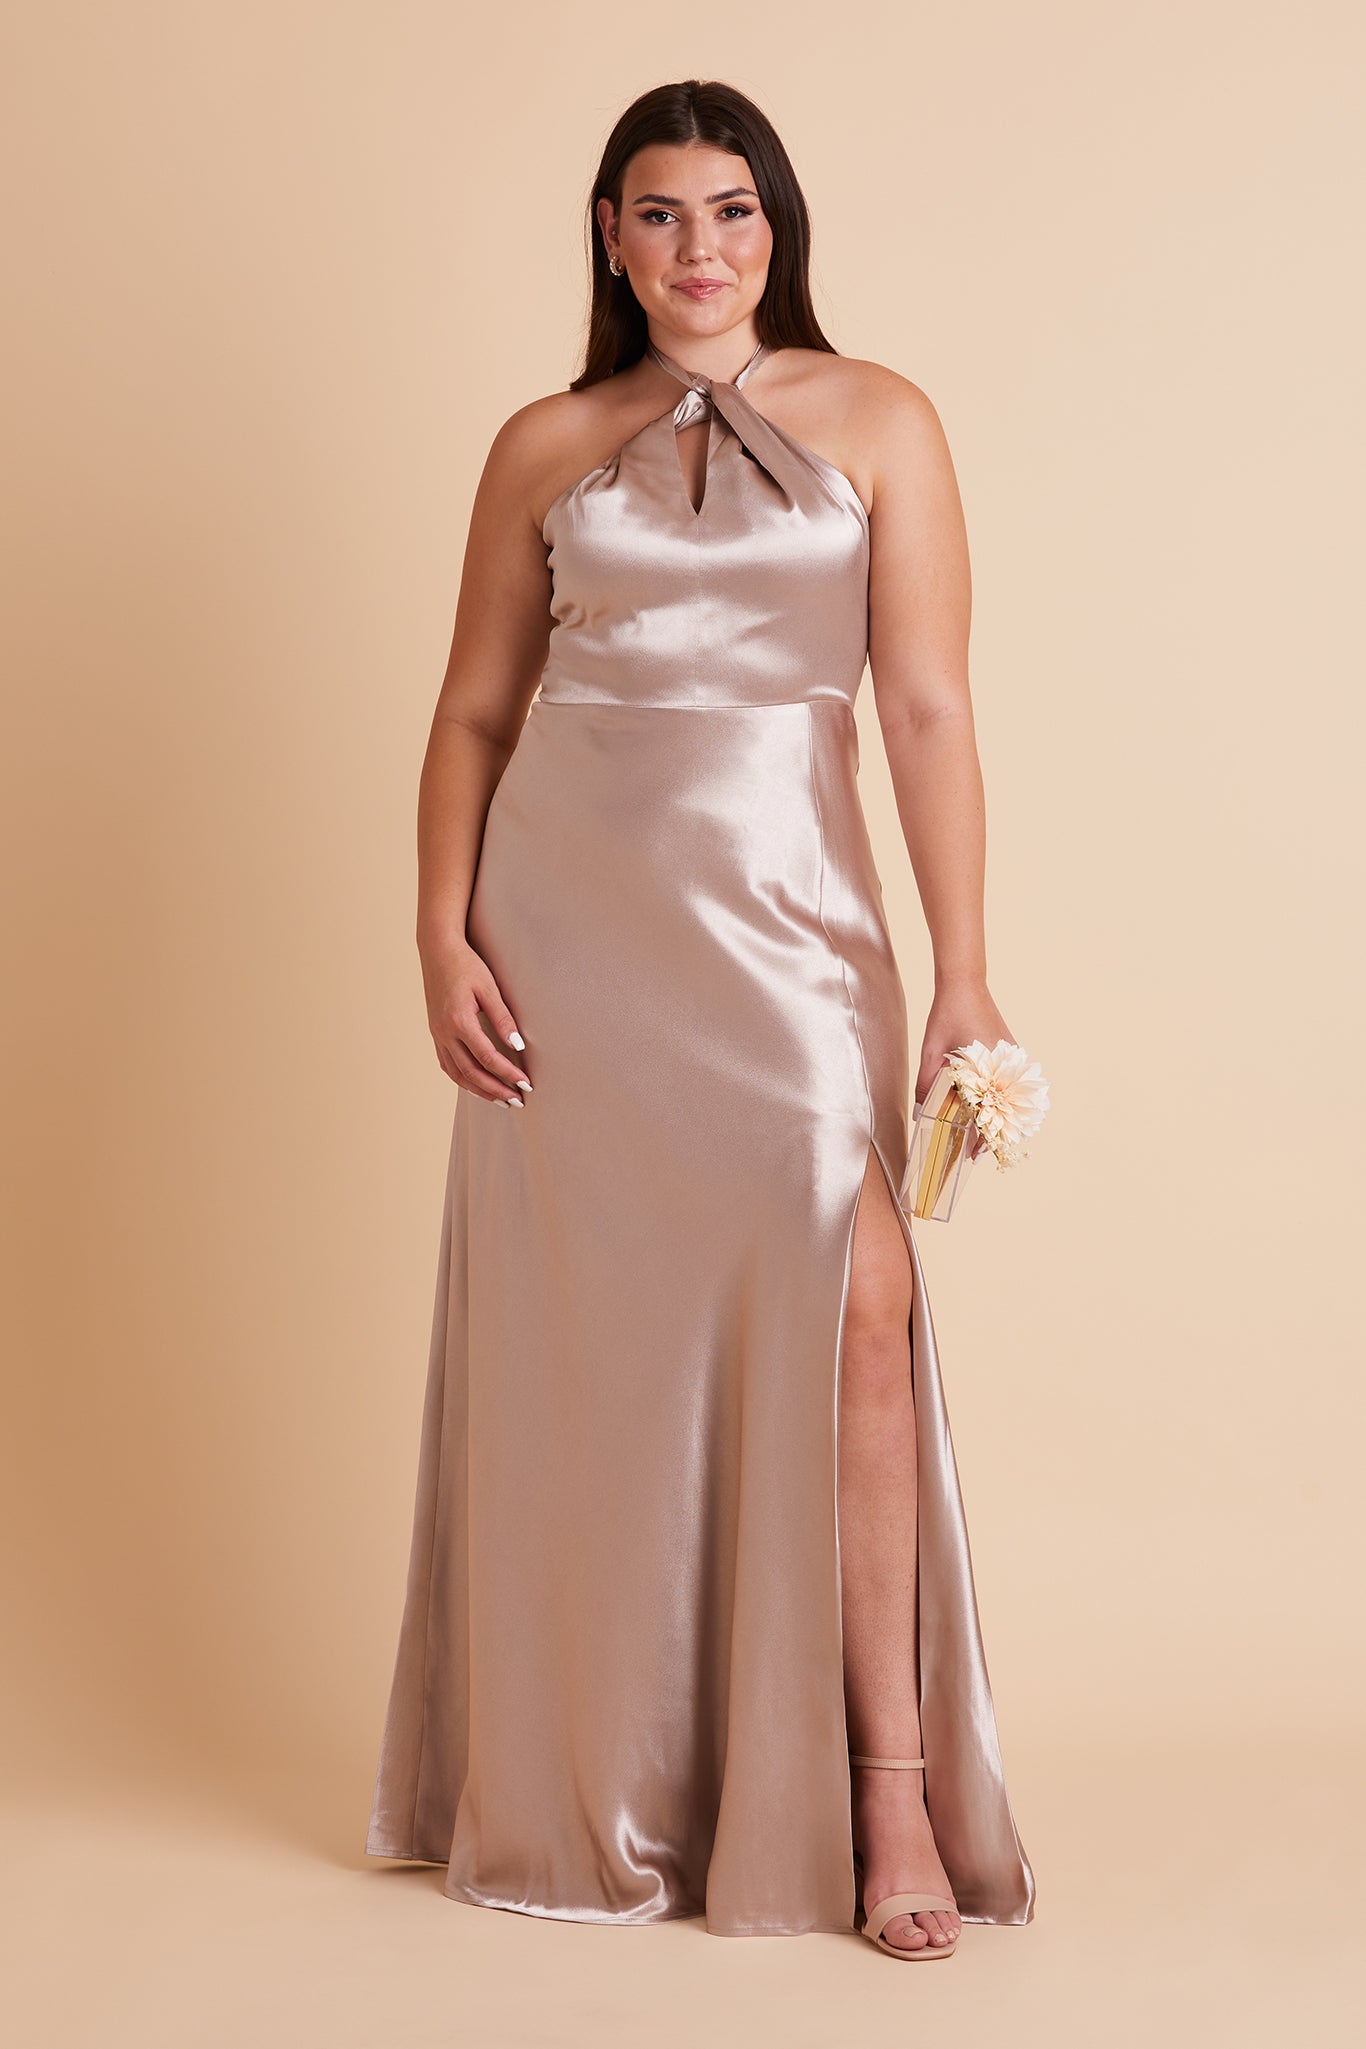 Front view of the Monica Dress Curve in taupe satin shows the model revealing their leg and foot through the dress slit. The model wears the Natalie Chunky Heel in almond.